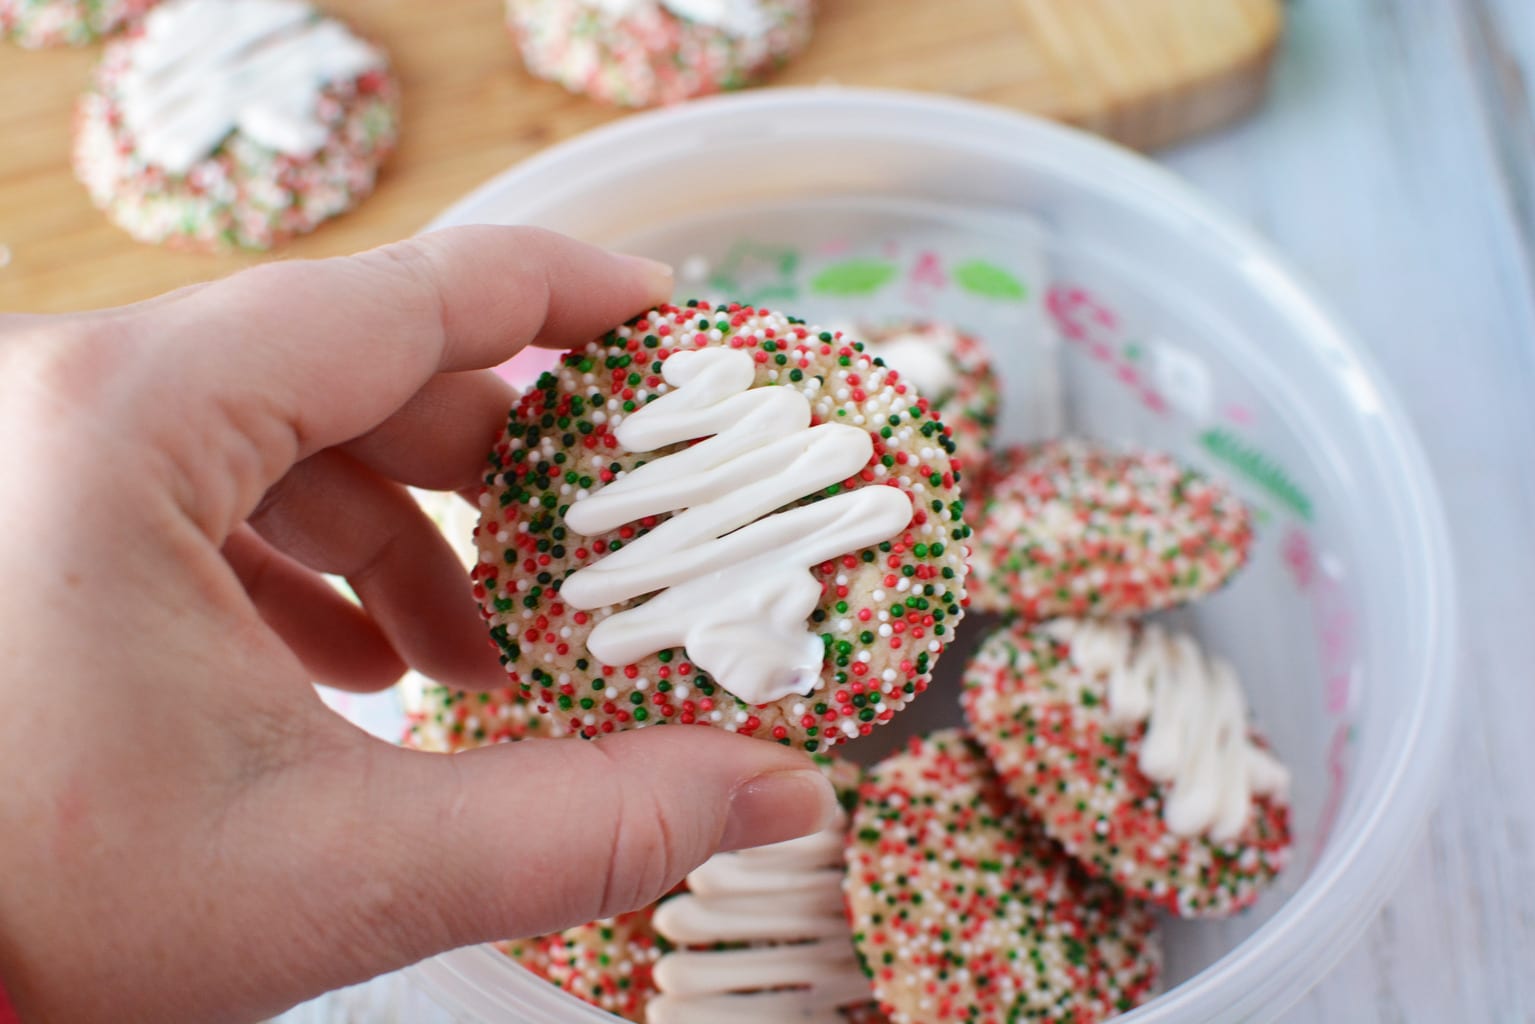 5 Ingredient Christmas Cookies - Make Them With a Cake Mix!